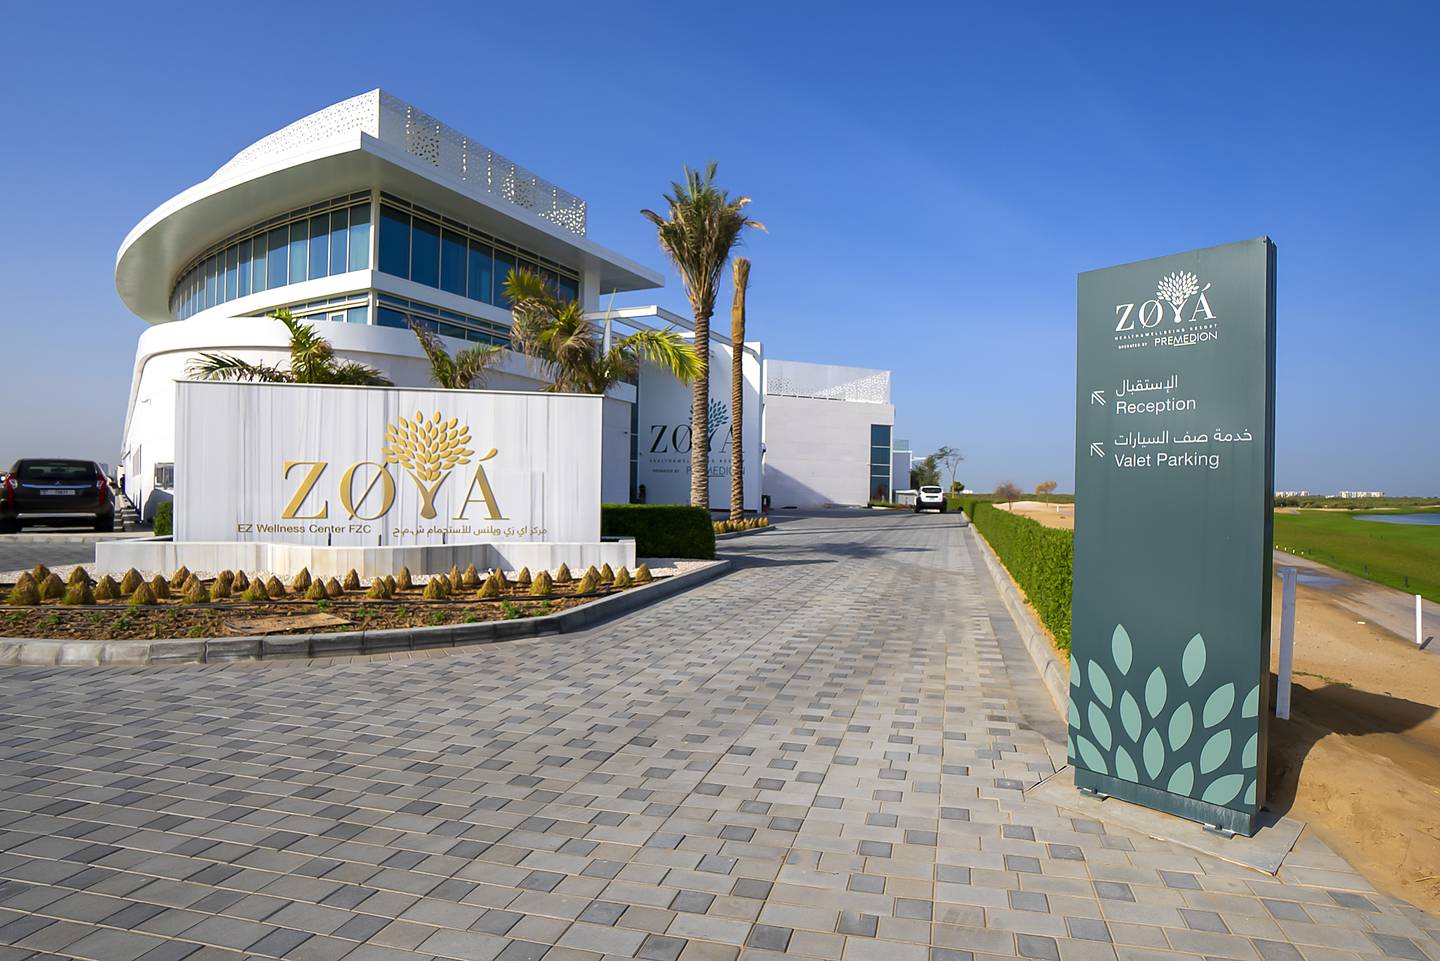 Zoya is the UAE's first five-star wellness retreat and is opening in Ajman on April 22. Photo: Zoya